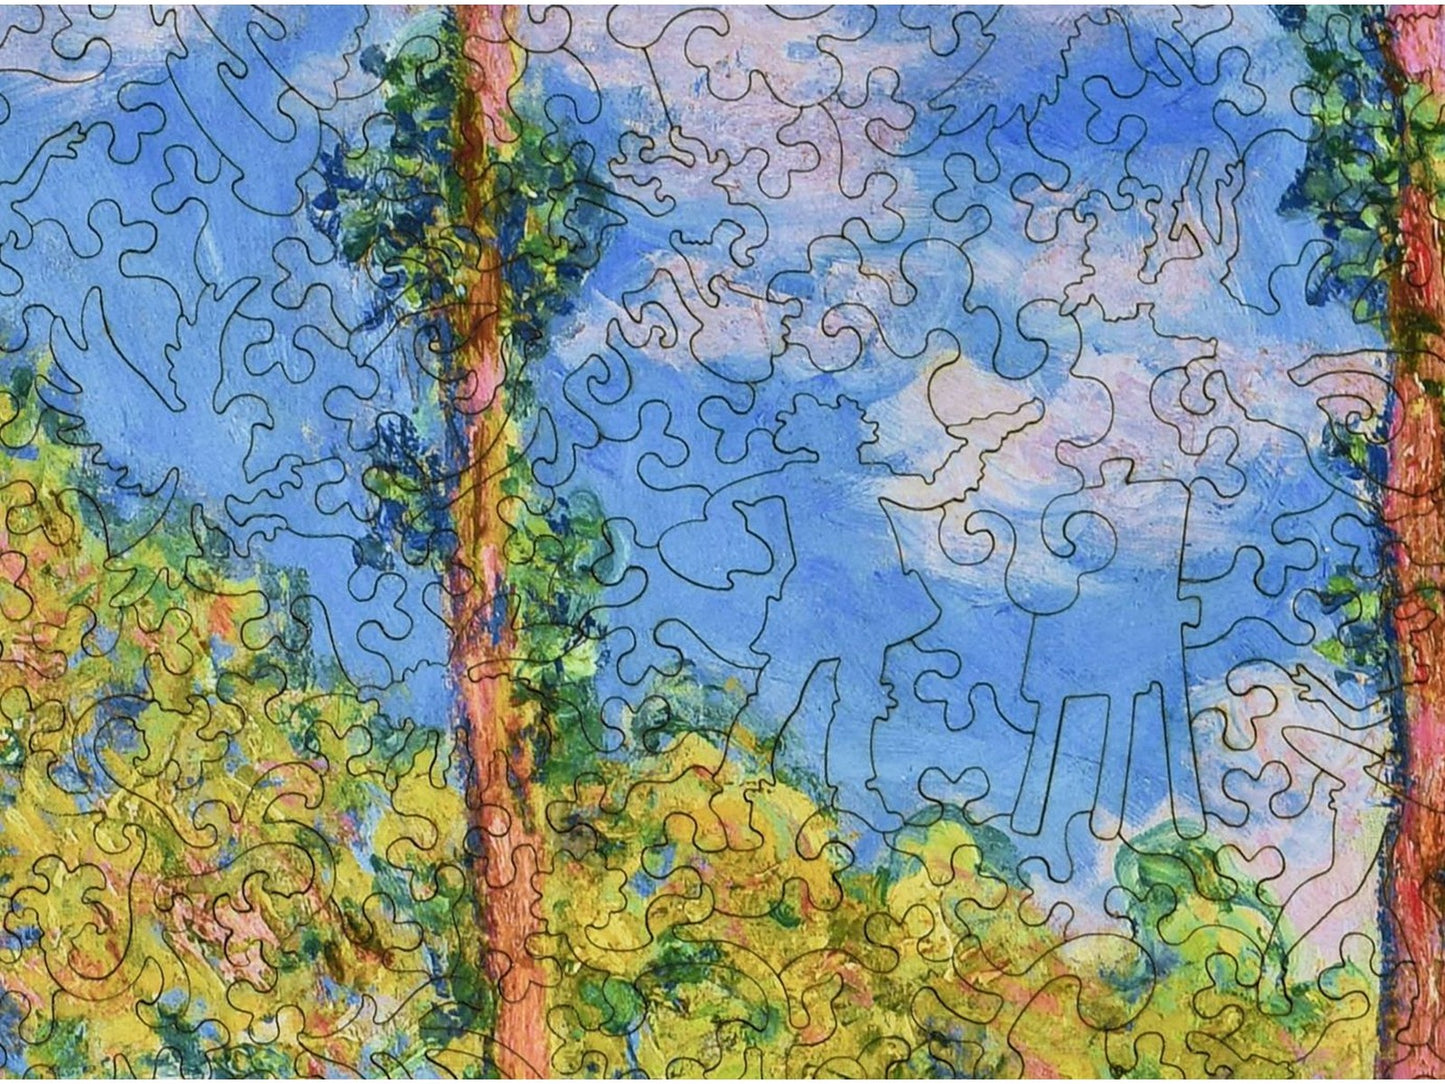 A closeup of the front of the puzzle, Poplars in the Sun, showing the detail in the pieces.